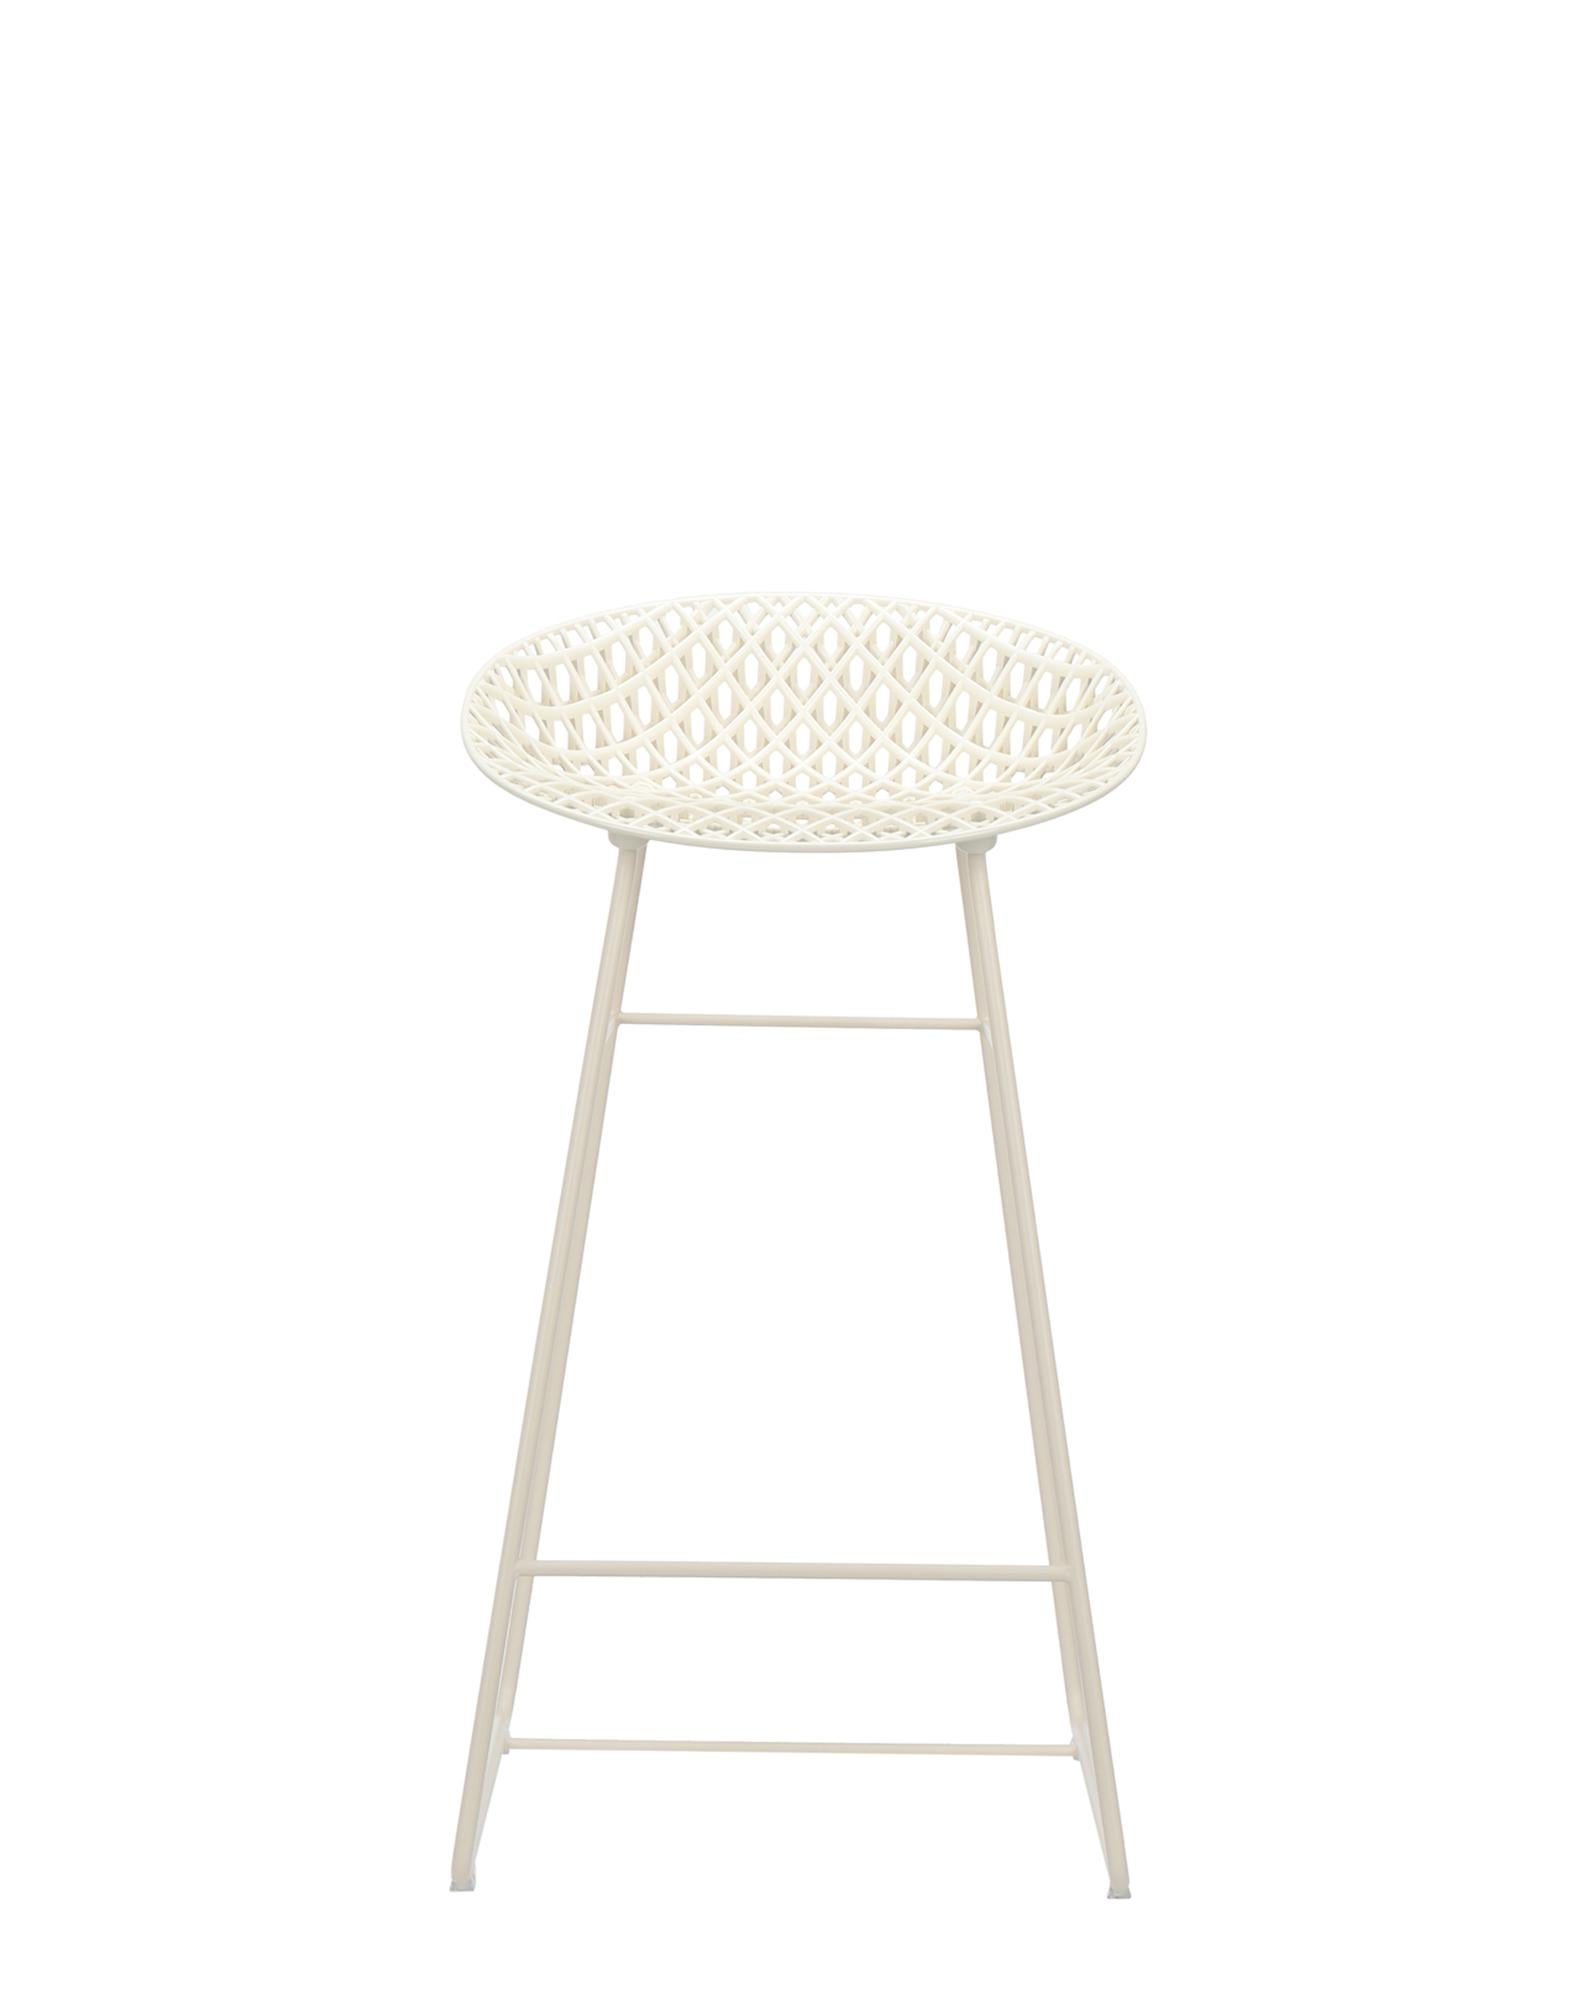 The Smatrik stool joins the family of seats created by Tokujin Yoshioka and is crafted using a mould which enables the recreation of a 3D net that overlaps and crosses over.Thanks to a special injection technology, the layers of transparent or